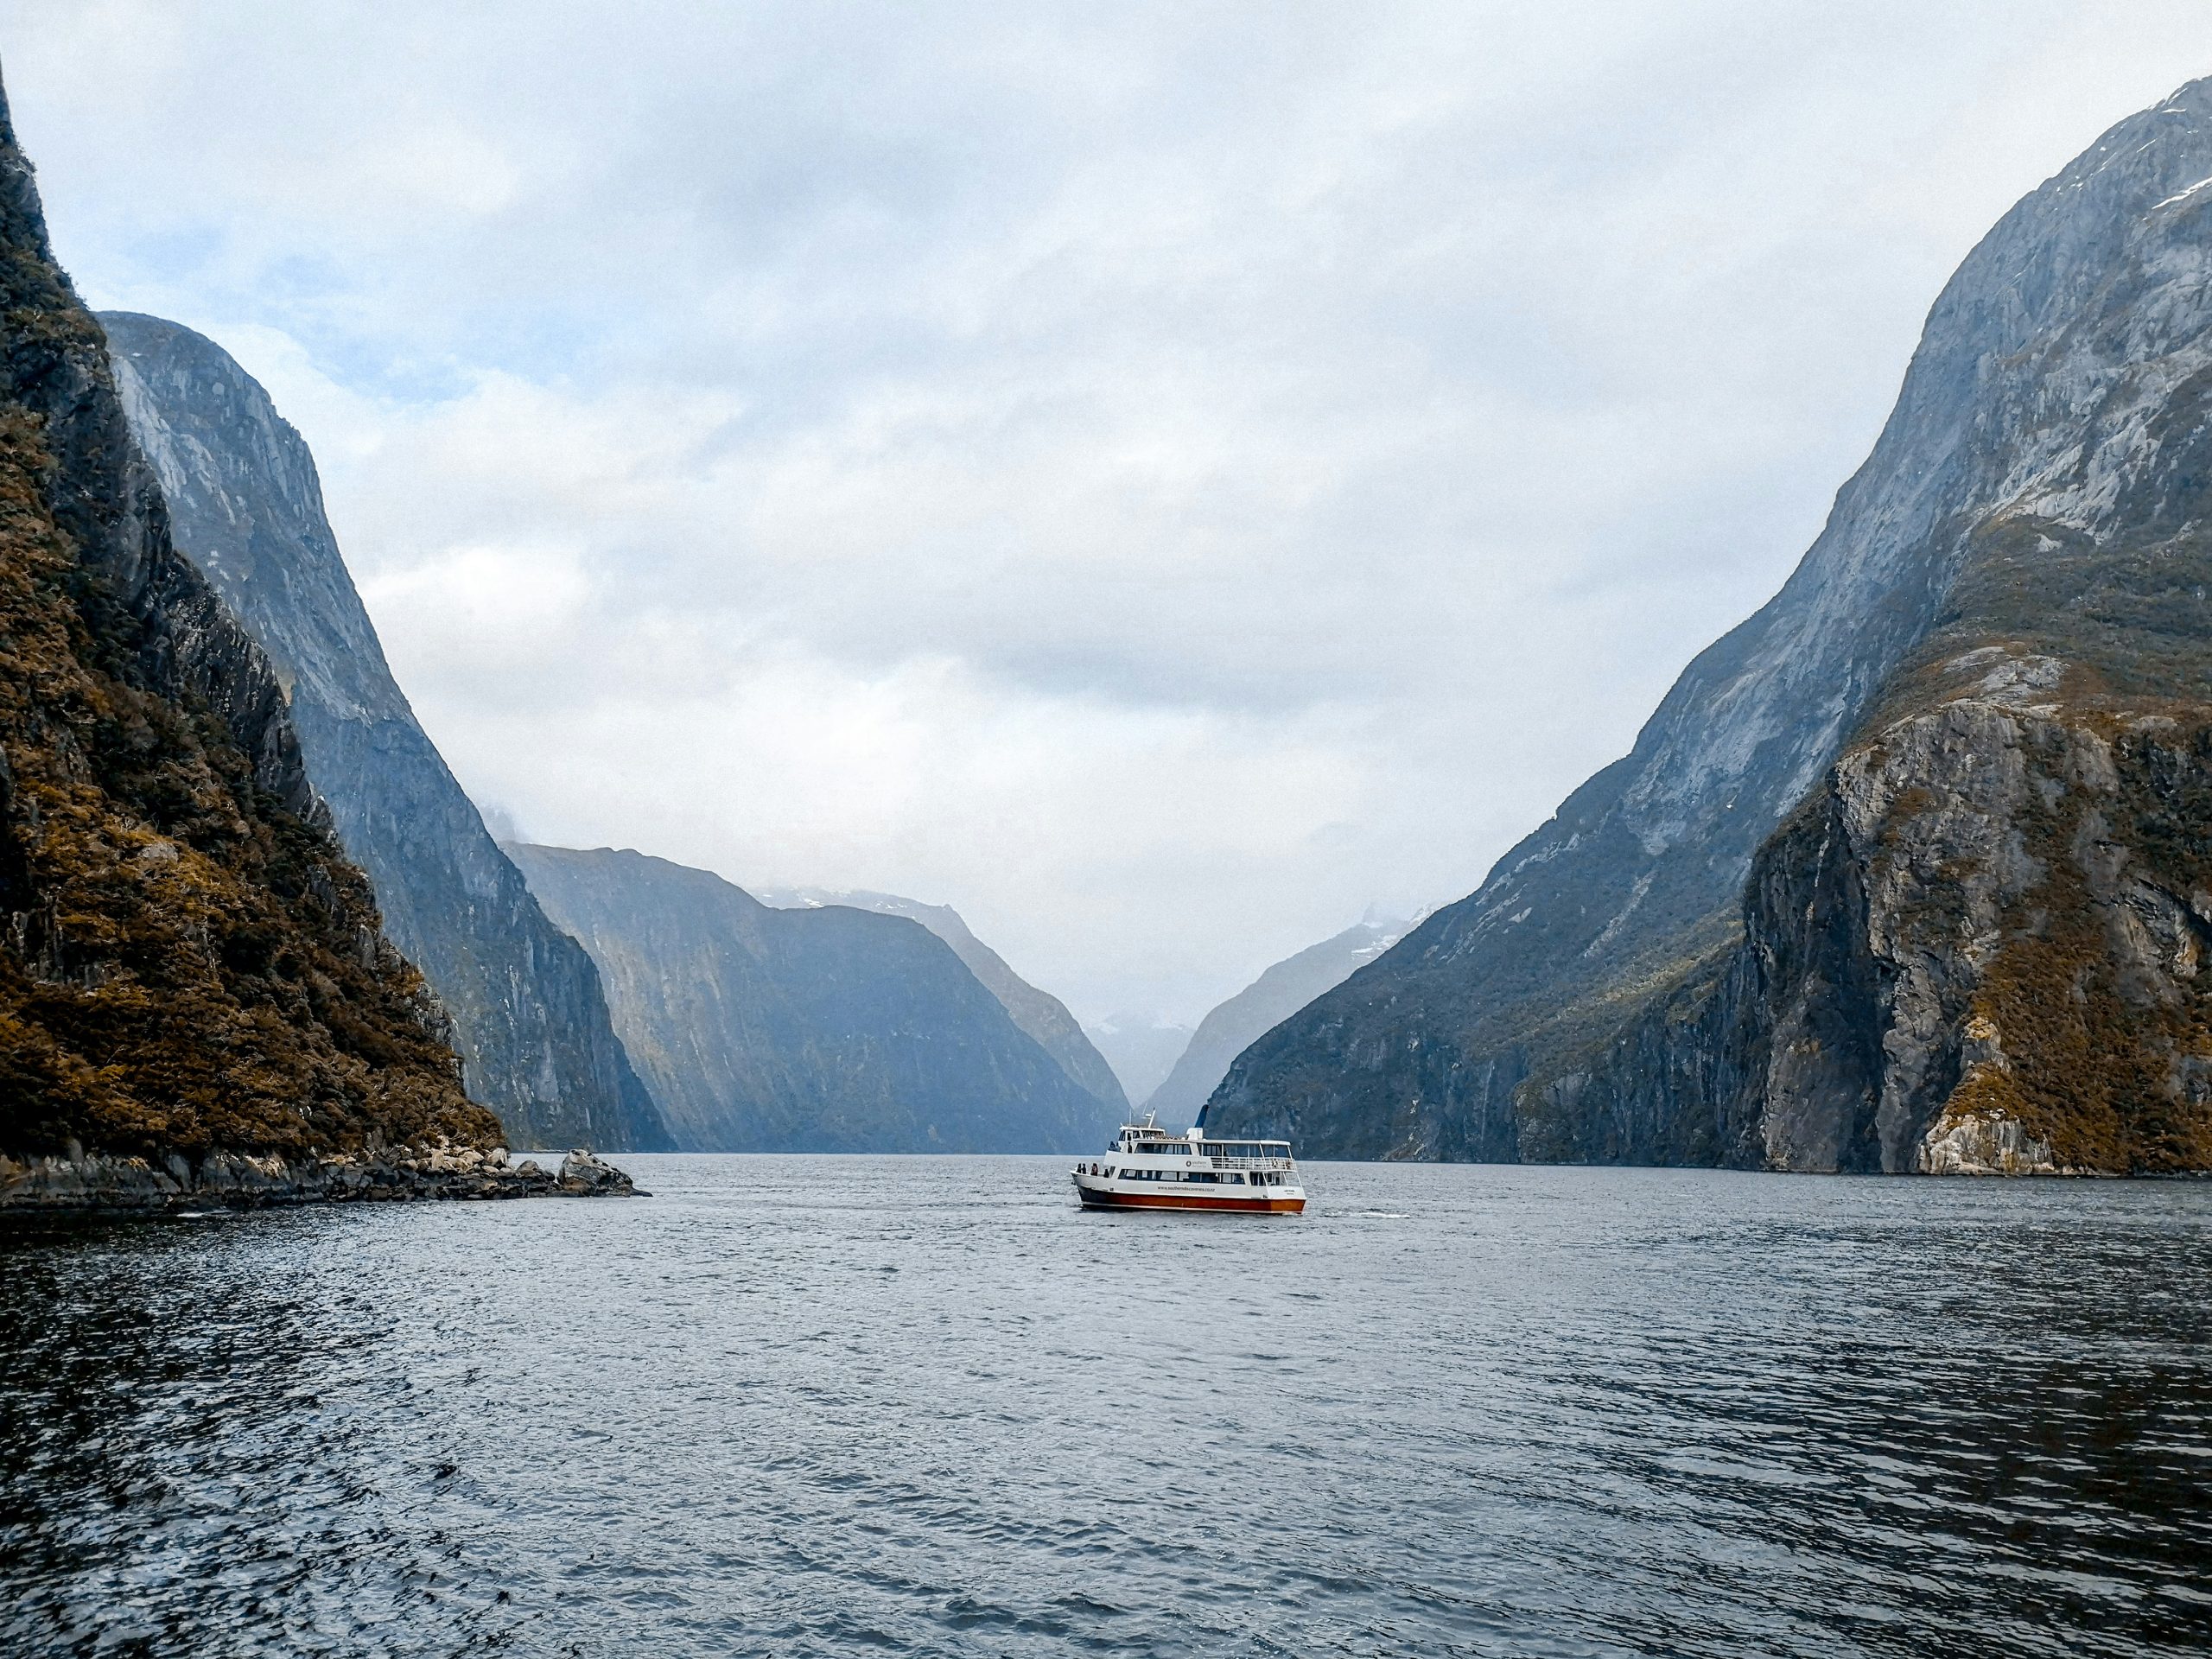 discover the breathtaking fjords and stunning natural beauty of norway with our fjord travel guide. plan your perfect fjord adventure with our tips and recommendations.